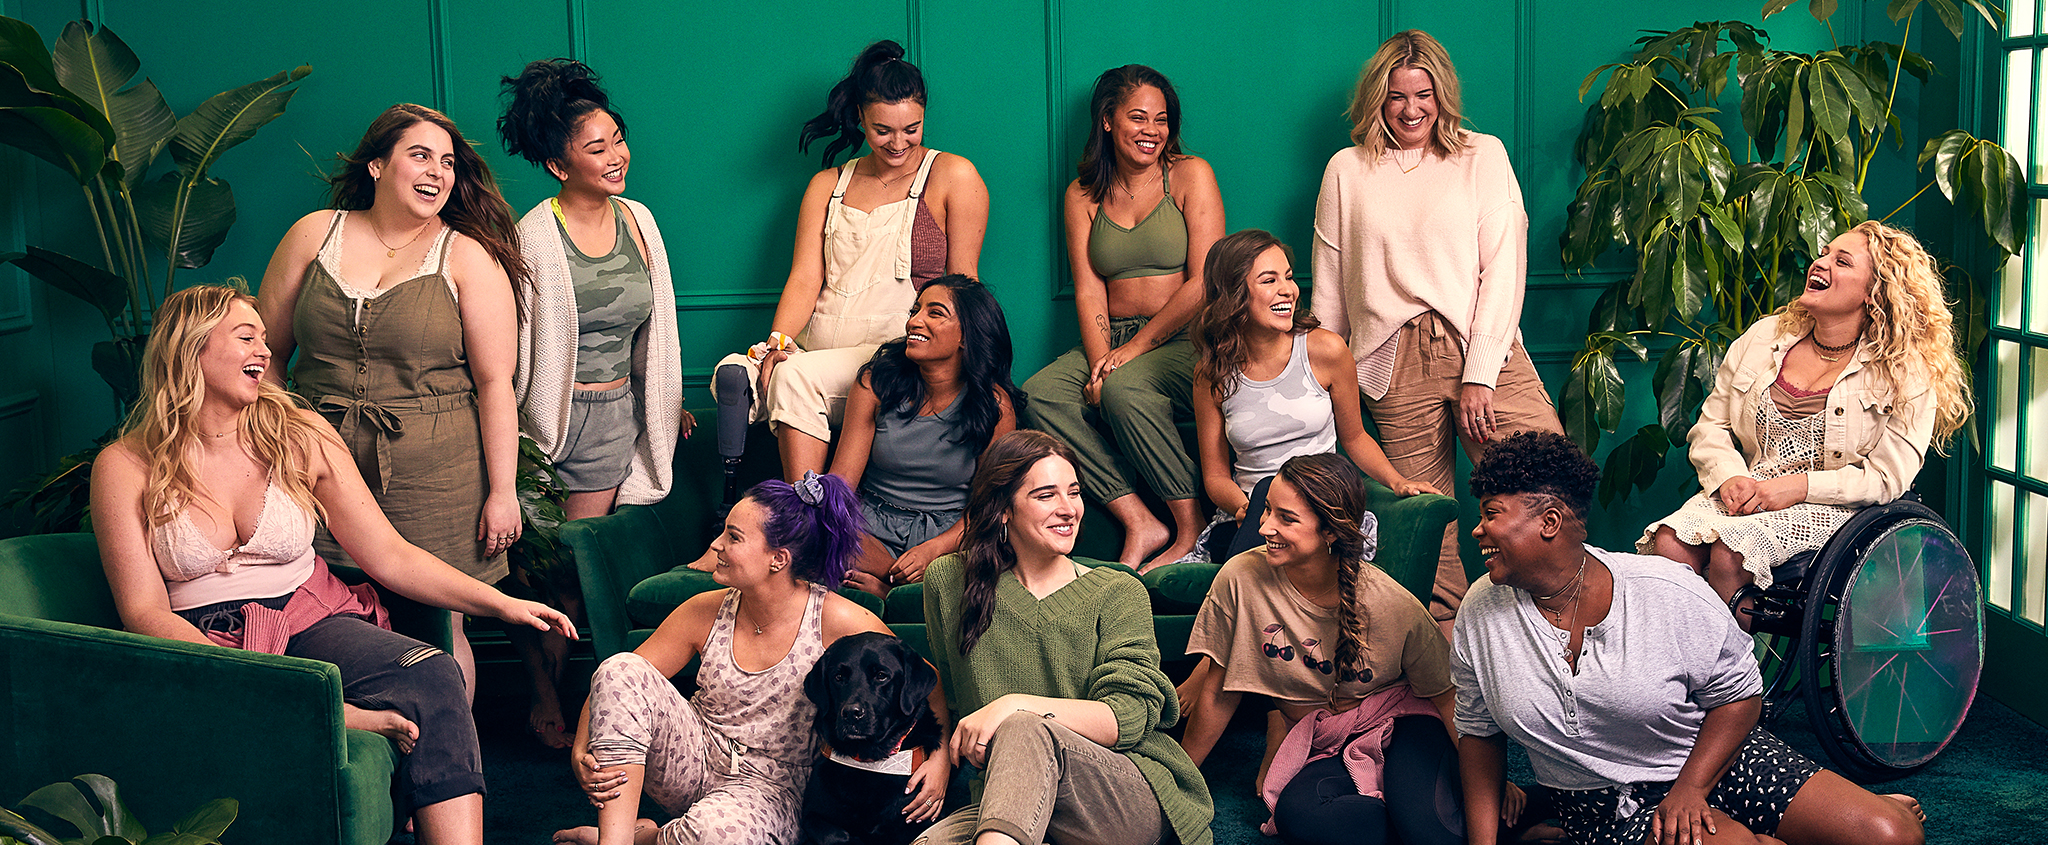 Role Models - #AerieREAL Life